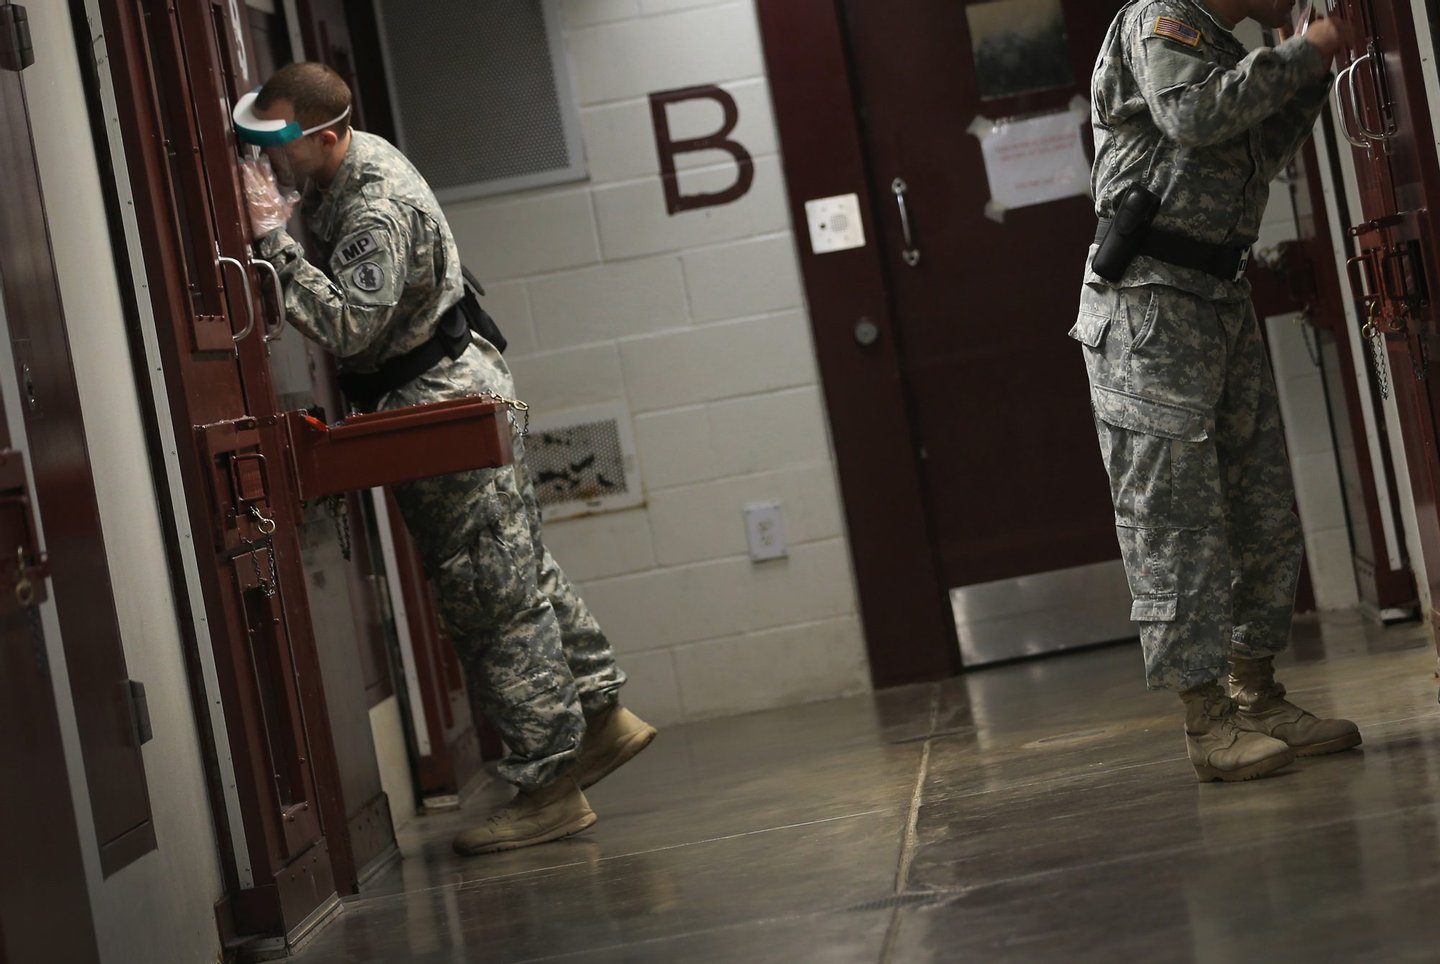 GUANTANAMO BAY, CUBA - JUNE 26: (EDITORS NOTE: Image has been reviewed by the U.S. Military prior to transmission.) U.S. Army Military Police check on detainees in a cell block during morning prayer at Camp V in the U.S. military prison for 'enemy combatants' on June 26, 2013 in Guantanamo Bay, Cuba. President Barack Obama has recently spoken again about closing the prison which has been used to hold prisoners from the invasion of Afghanistan and the war on terror since early 2002. (Photo by Joe Raedle/Getty Images)